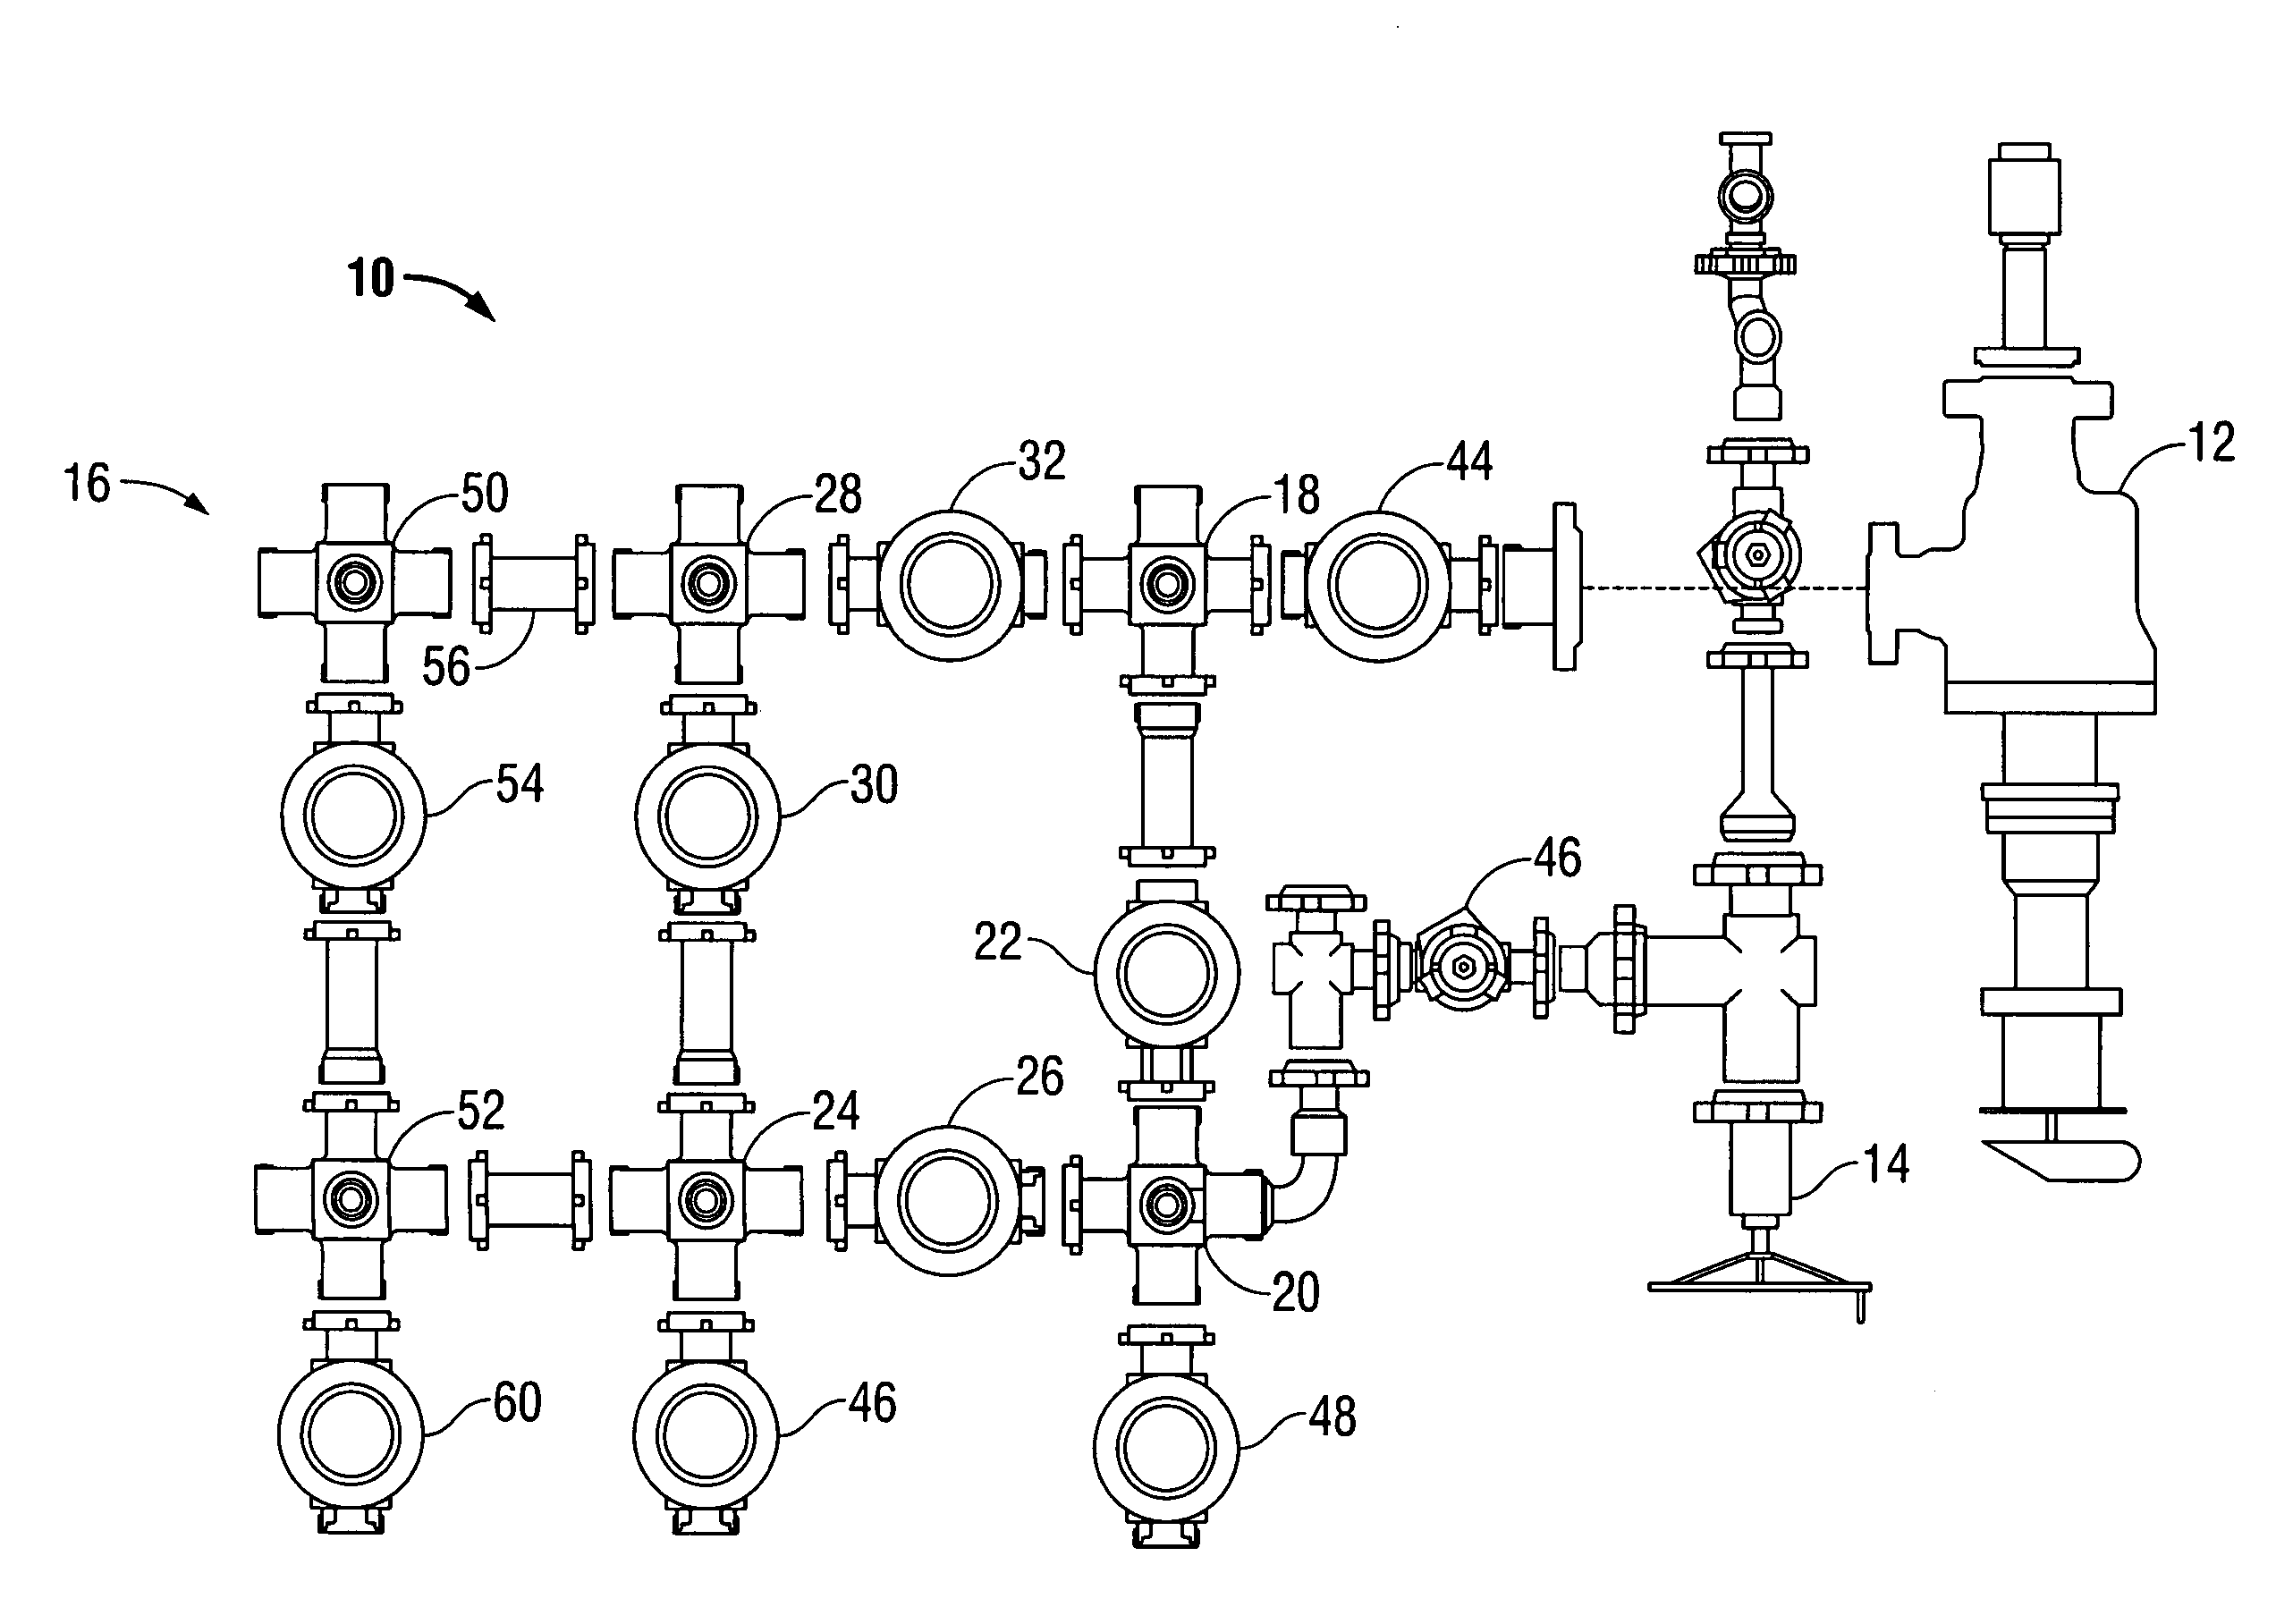 Fractionation system and methods of using same